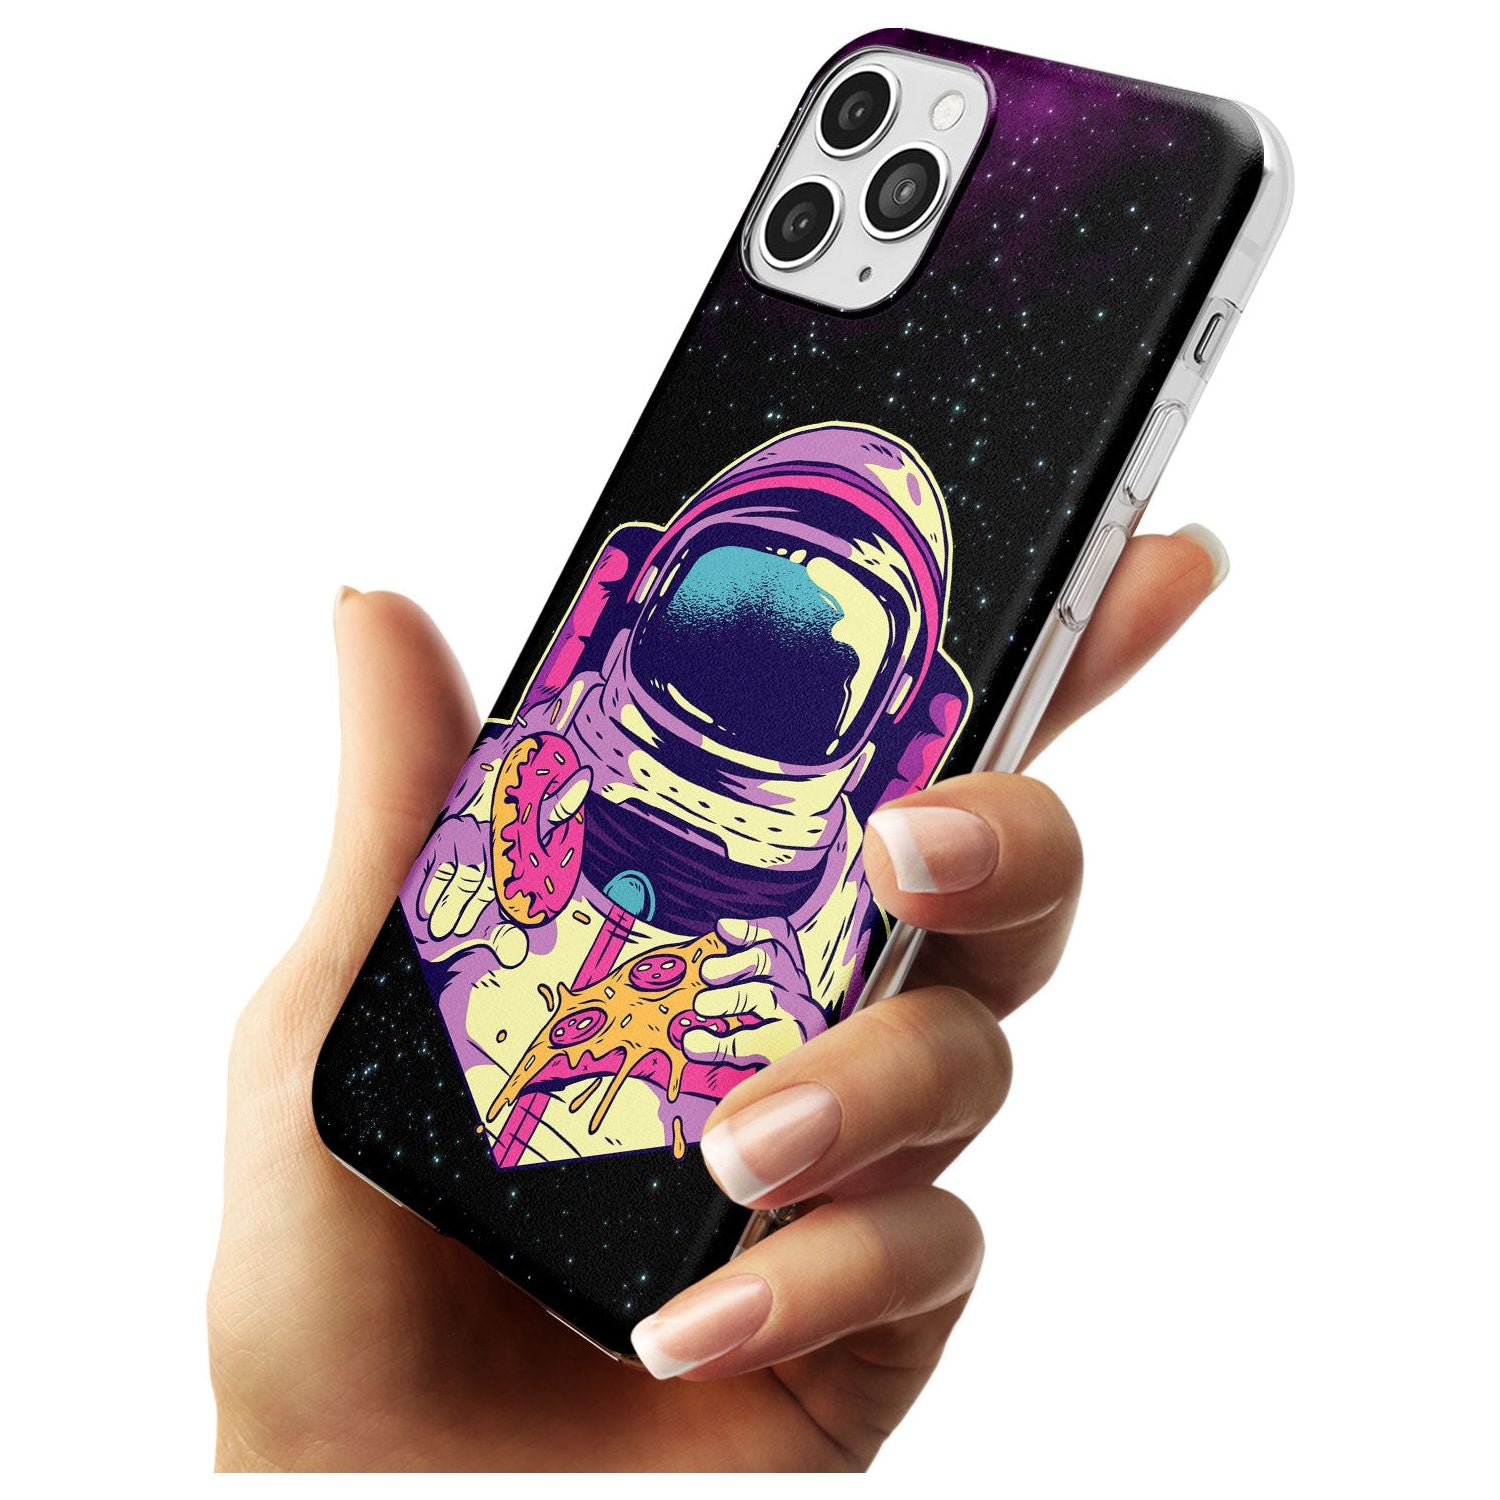 Astro Cheat Meal Slim TPU Phone Case for iPhone 11 Pro Max